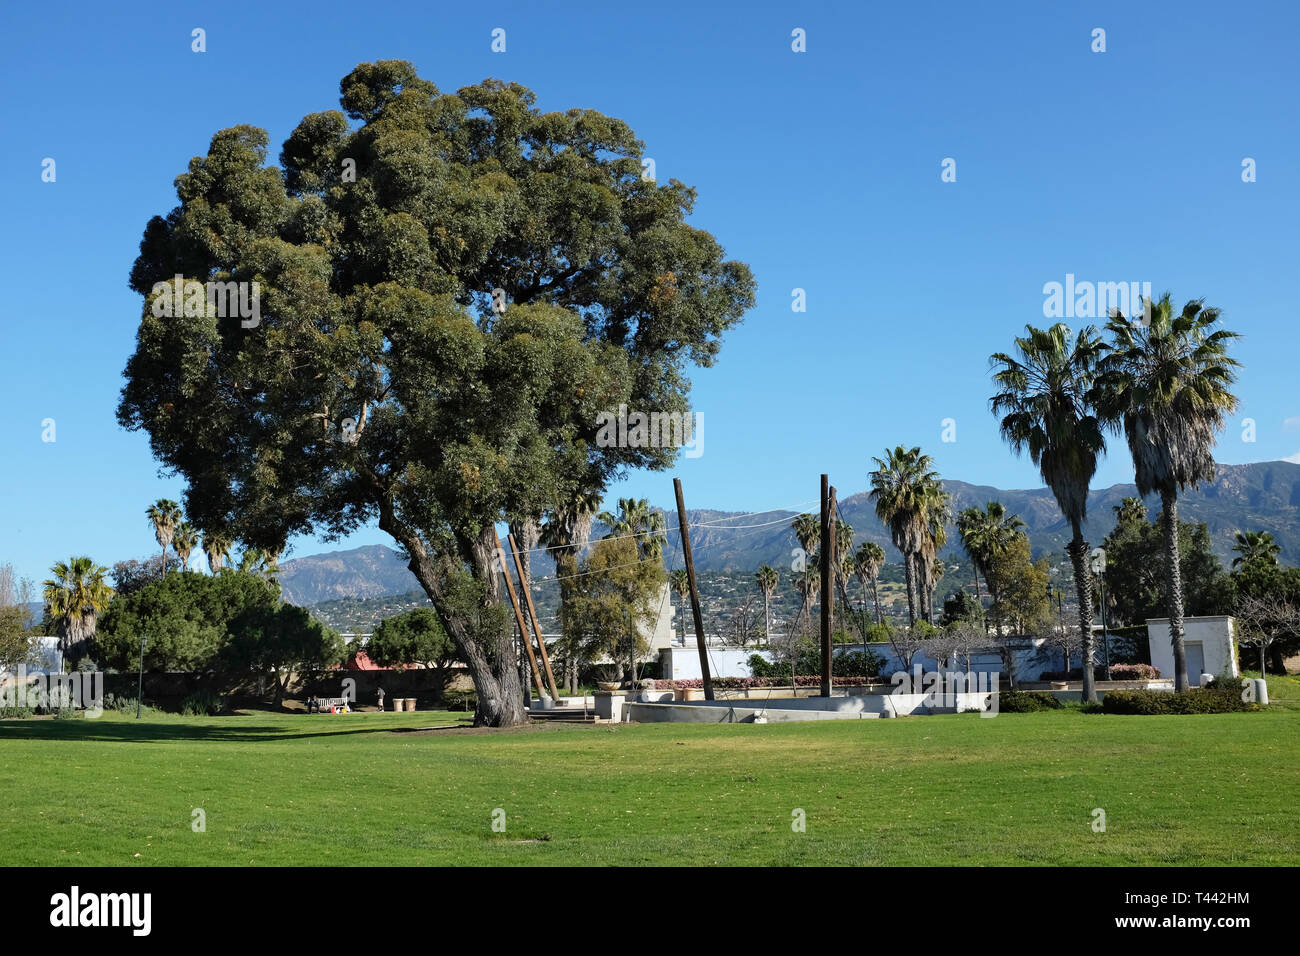 SANTA BARBARA, CALIFORNIA - APRIL 12, 2019: Chase Palm Park lawn and play area. A public park along the waterfront with play areas, pond, picnic areas Stock Photo